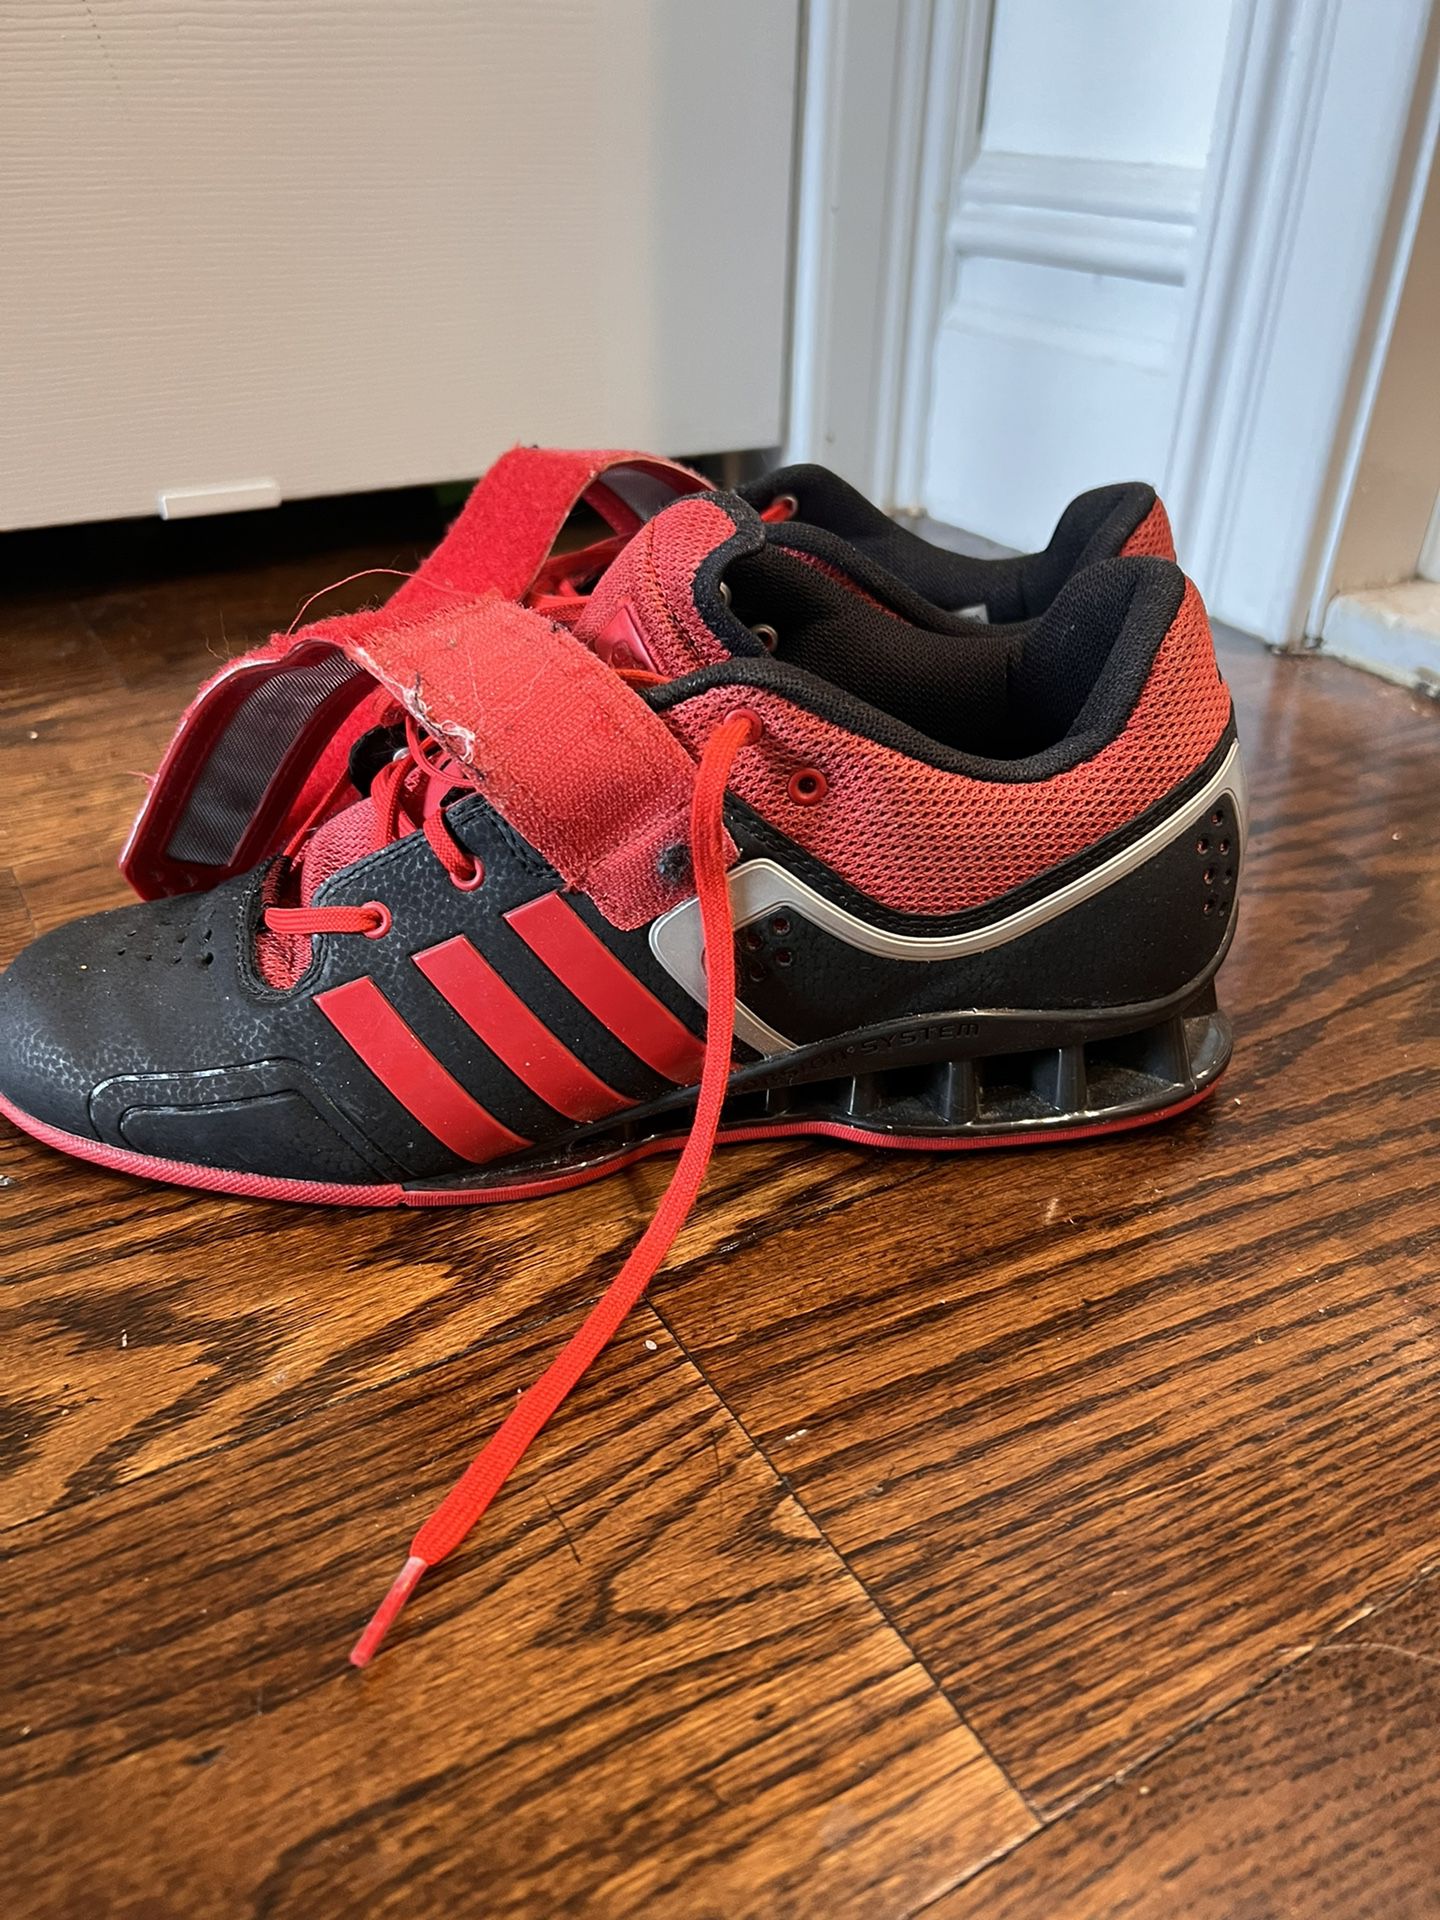 Retentie munitie woensdag Adidas Adipower Weightlifting Shoes 10.5 for Sale in New York, NY - OfferUp